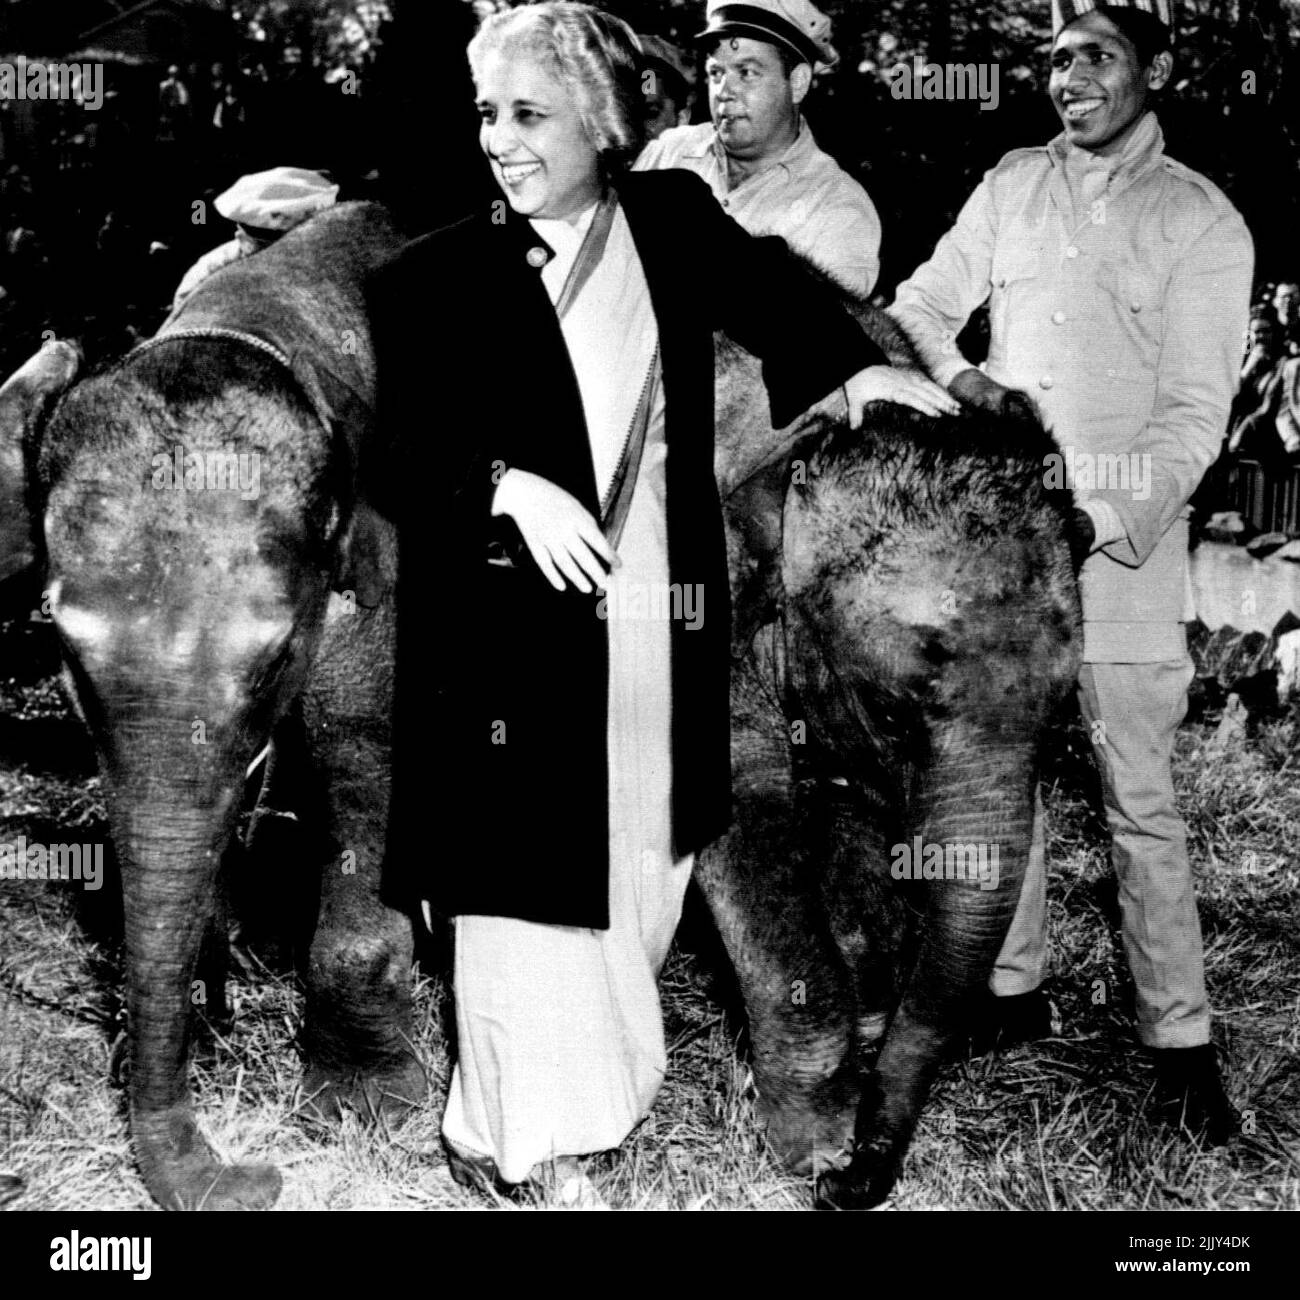 Madame Ambassador Presents Elephants To Zoo -- Madame Vijaya Pandit, India's Ambassador to the United States, Stands smiling between two baby Elephants as she presents them to the National Zoological Park today as a gift from Prime Minister Jawaharlal Nehru of India. The newly-arrived babies are 'Shanti' (left), a 2 1/2 year old female, and 'Ashok', a two year old male. The trainer who brought them from Bombay to New York by ship and to Washington by truck, Baby Jan stands at right. April 16, 1950. (Photo by AP Wirephoto). Stock Photo